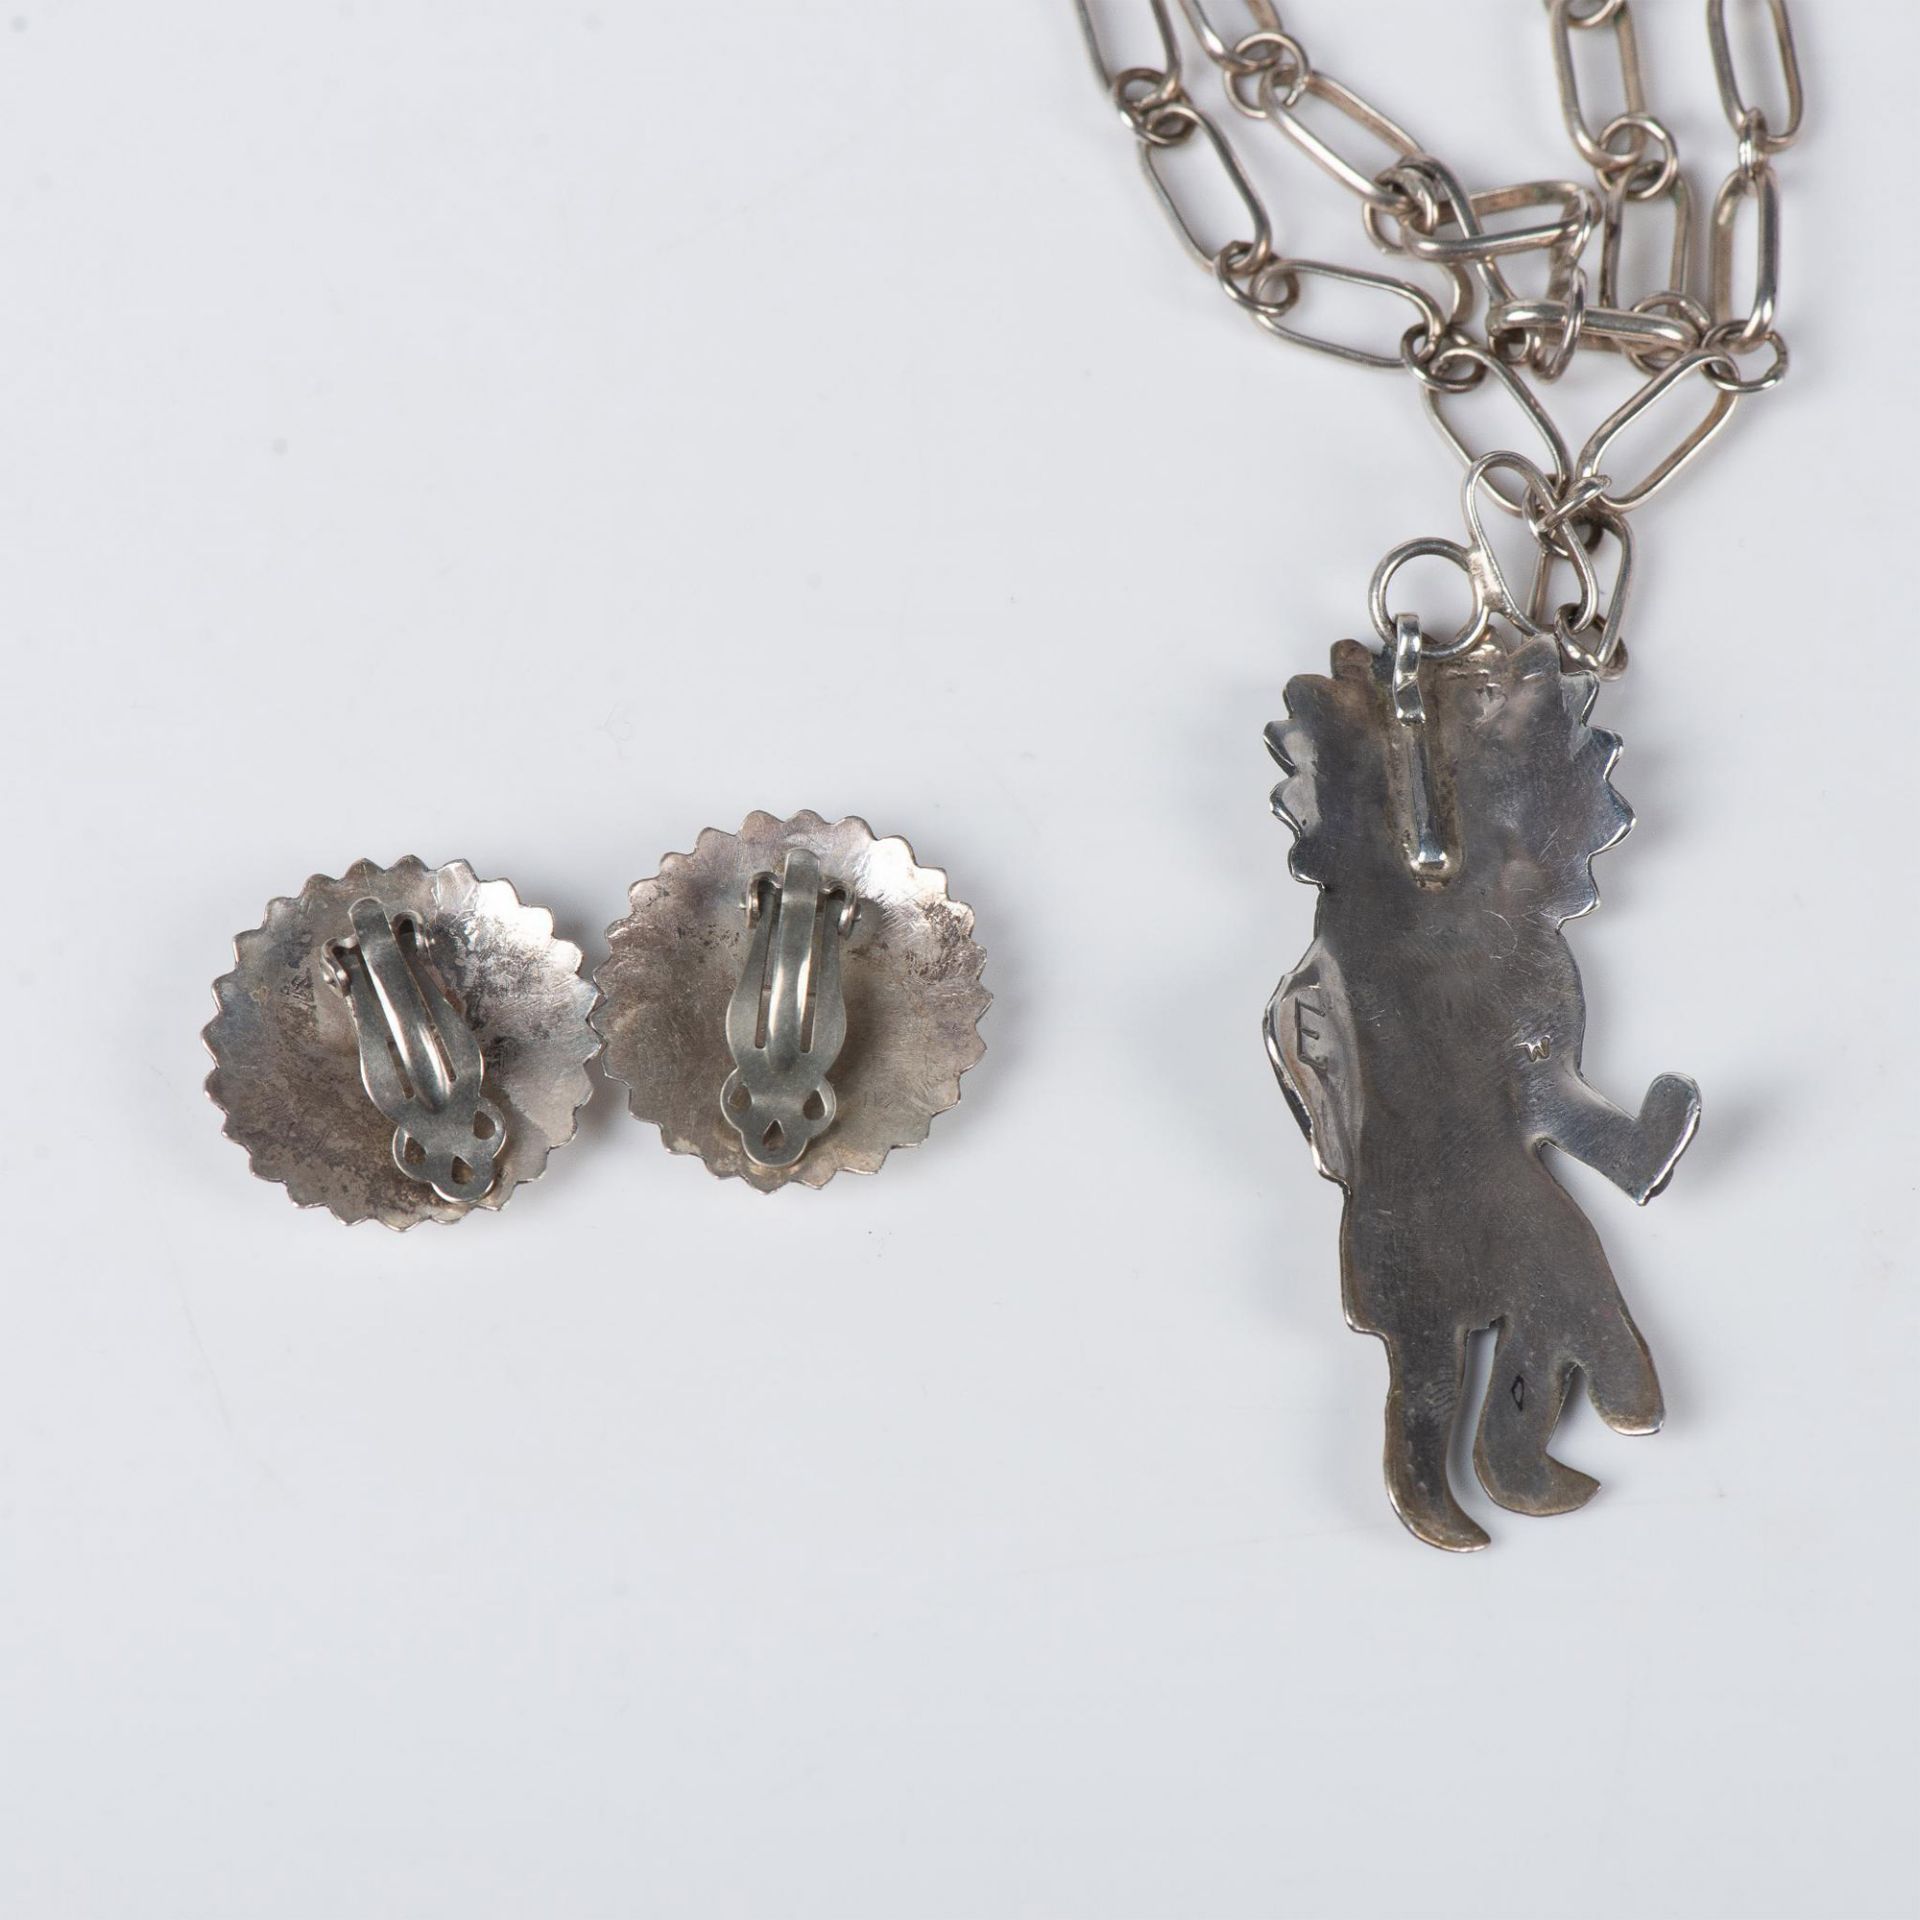 2pc Zuni Sterling Silver Sunface Necklace & Clip-On Earrings - Image 3 of 5